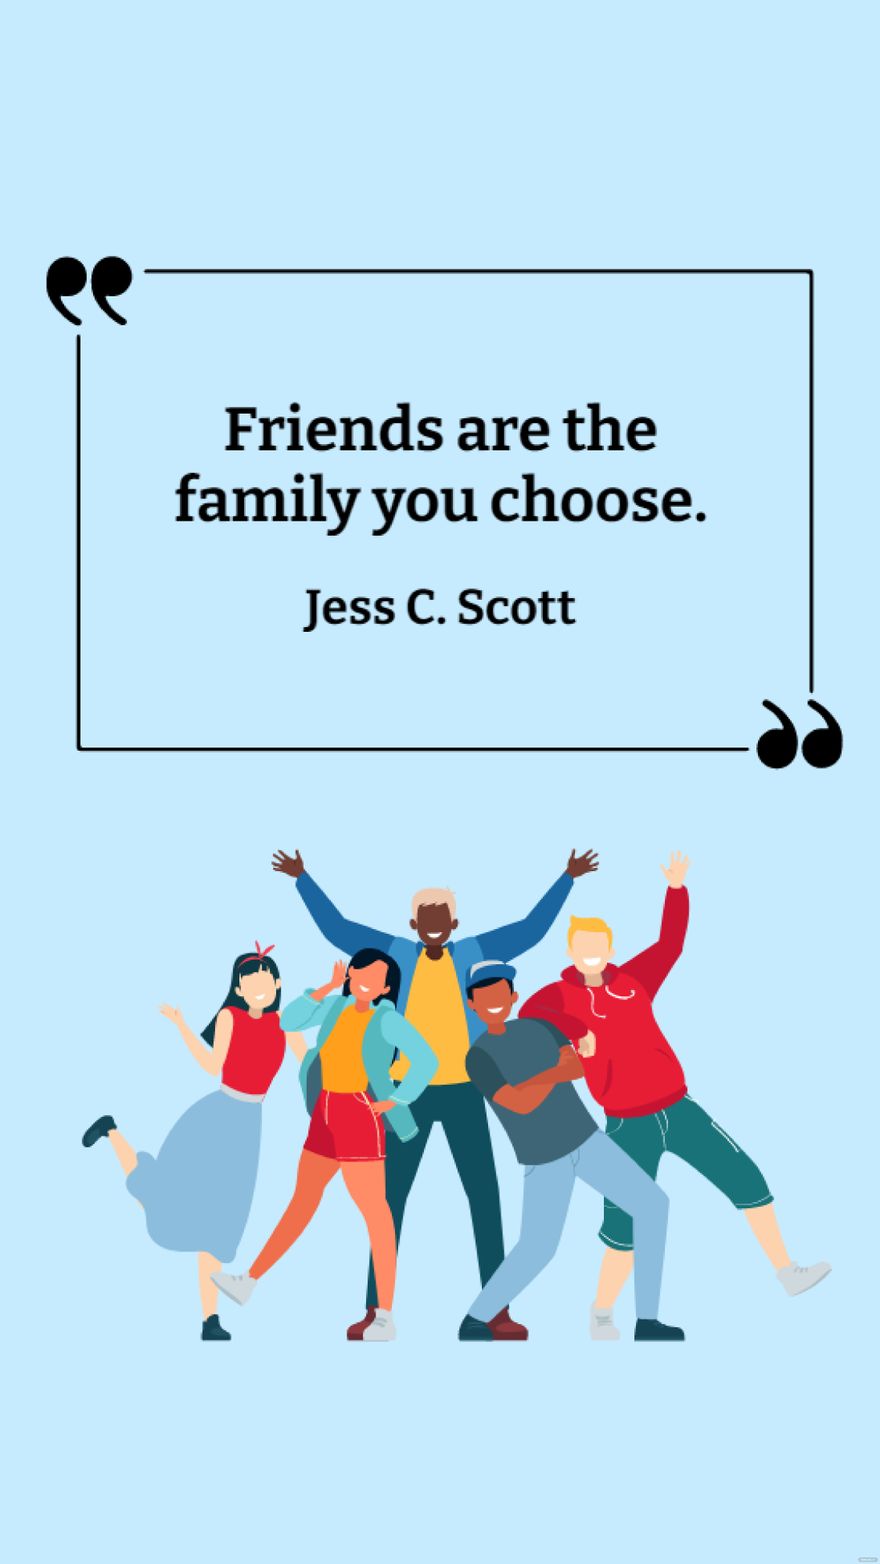 Free Jess C. Scott - Friends are the family you choose. in JPG